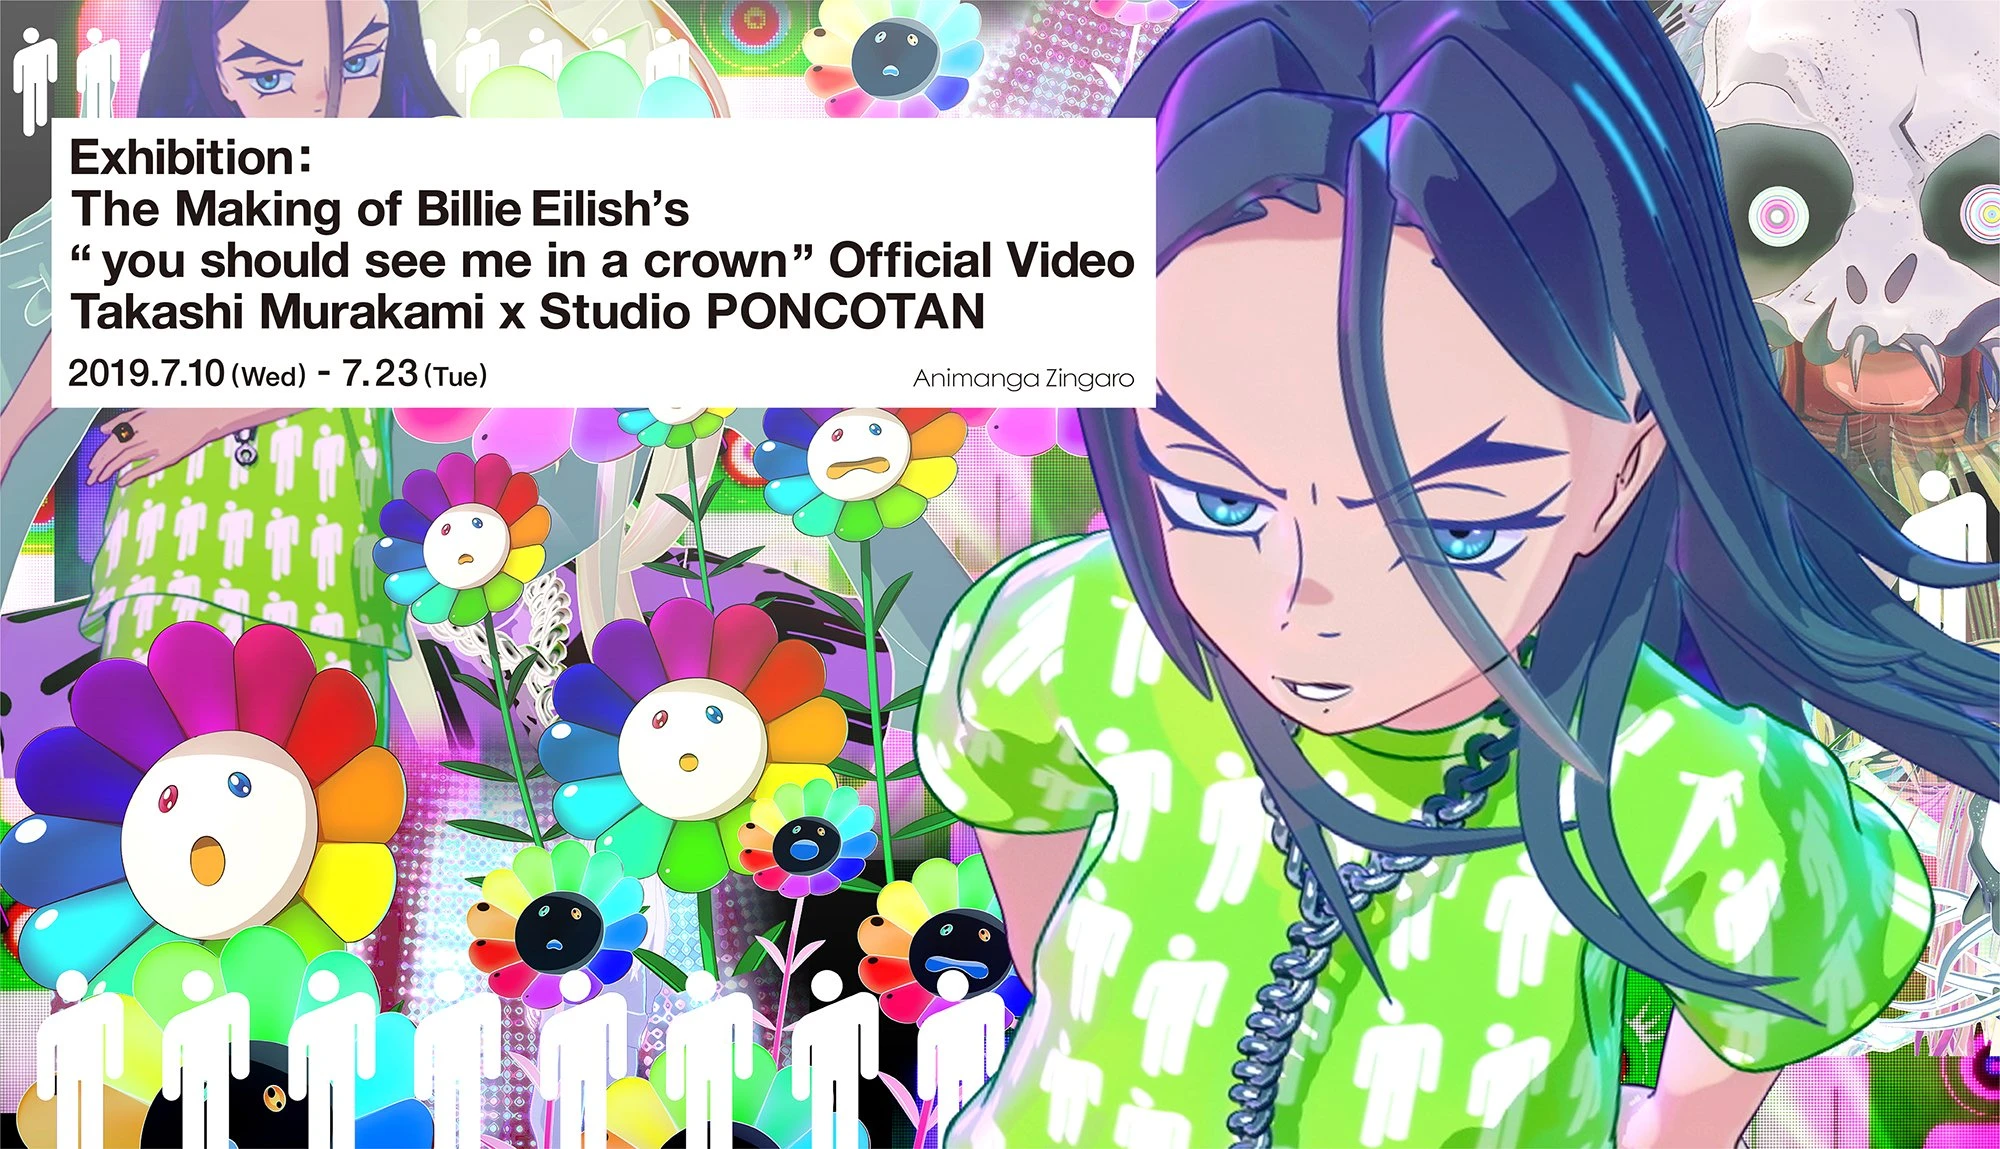 Exhibition: The Making of Billie Eilish’s “you should see me in a crown” Official Video Takashi Murakami x Studio PONCOTAN／画像はAnimanga Zingaro公式サイトより